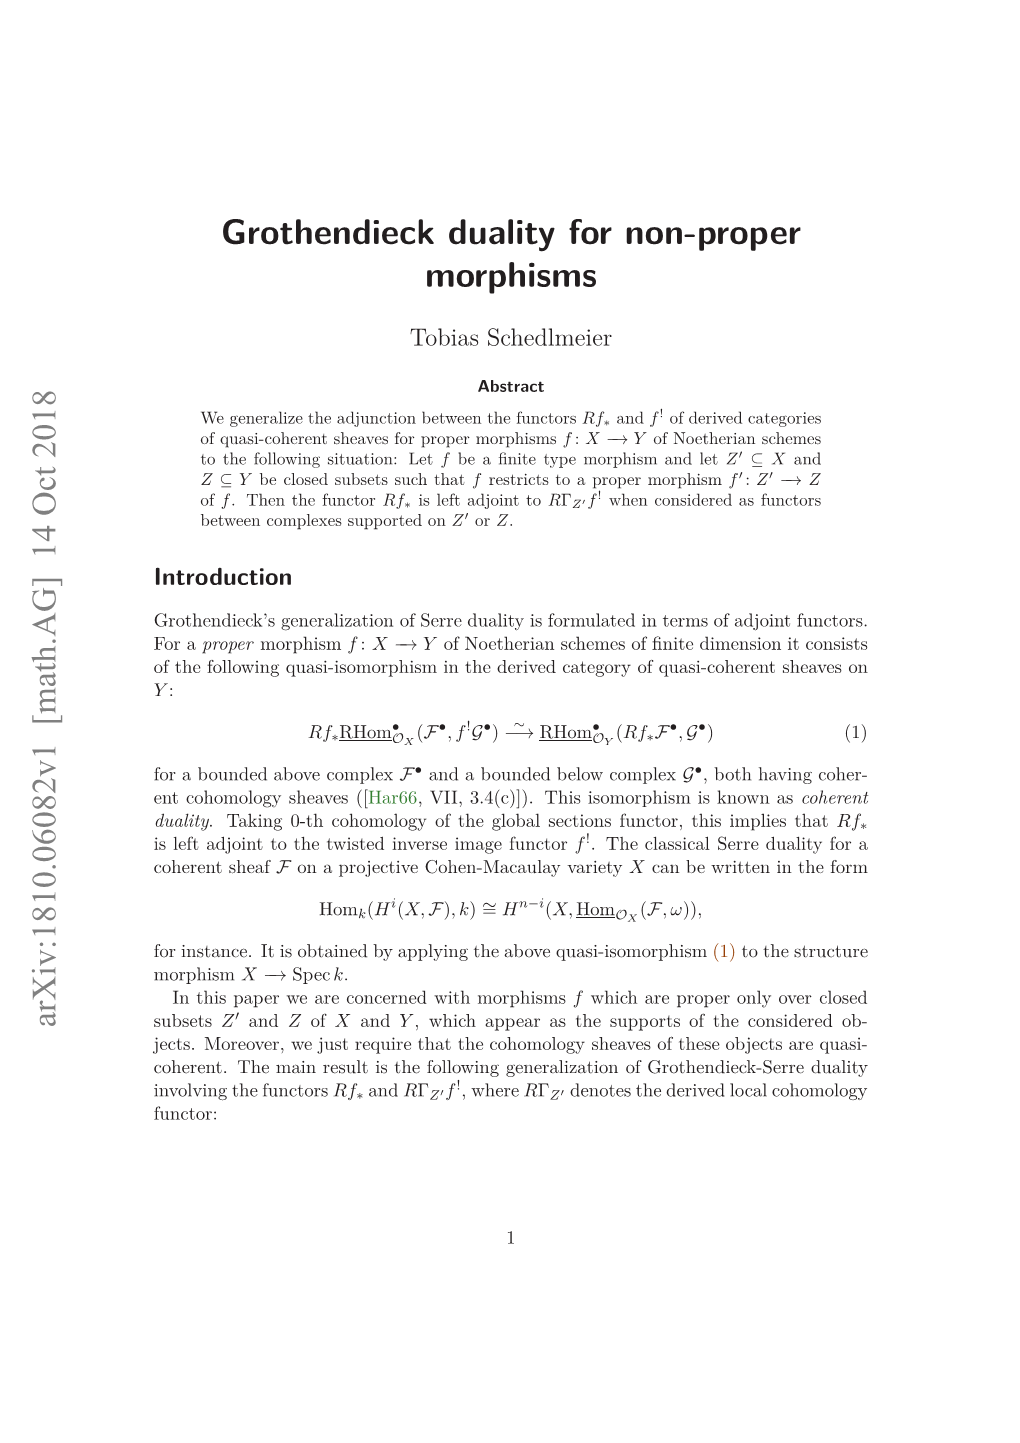 Grothendieck Duality for Non-Proper Morphisms